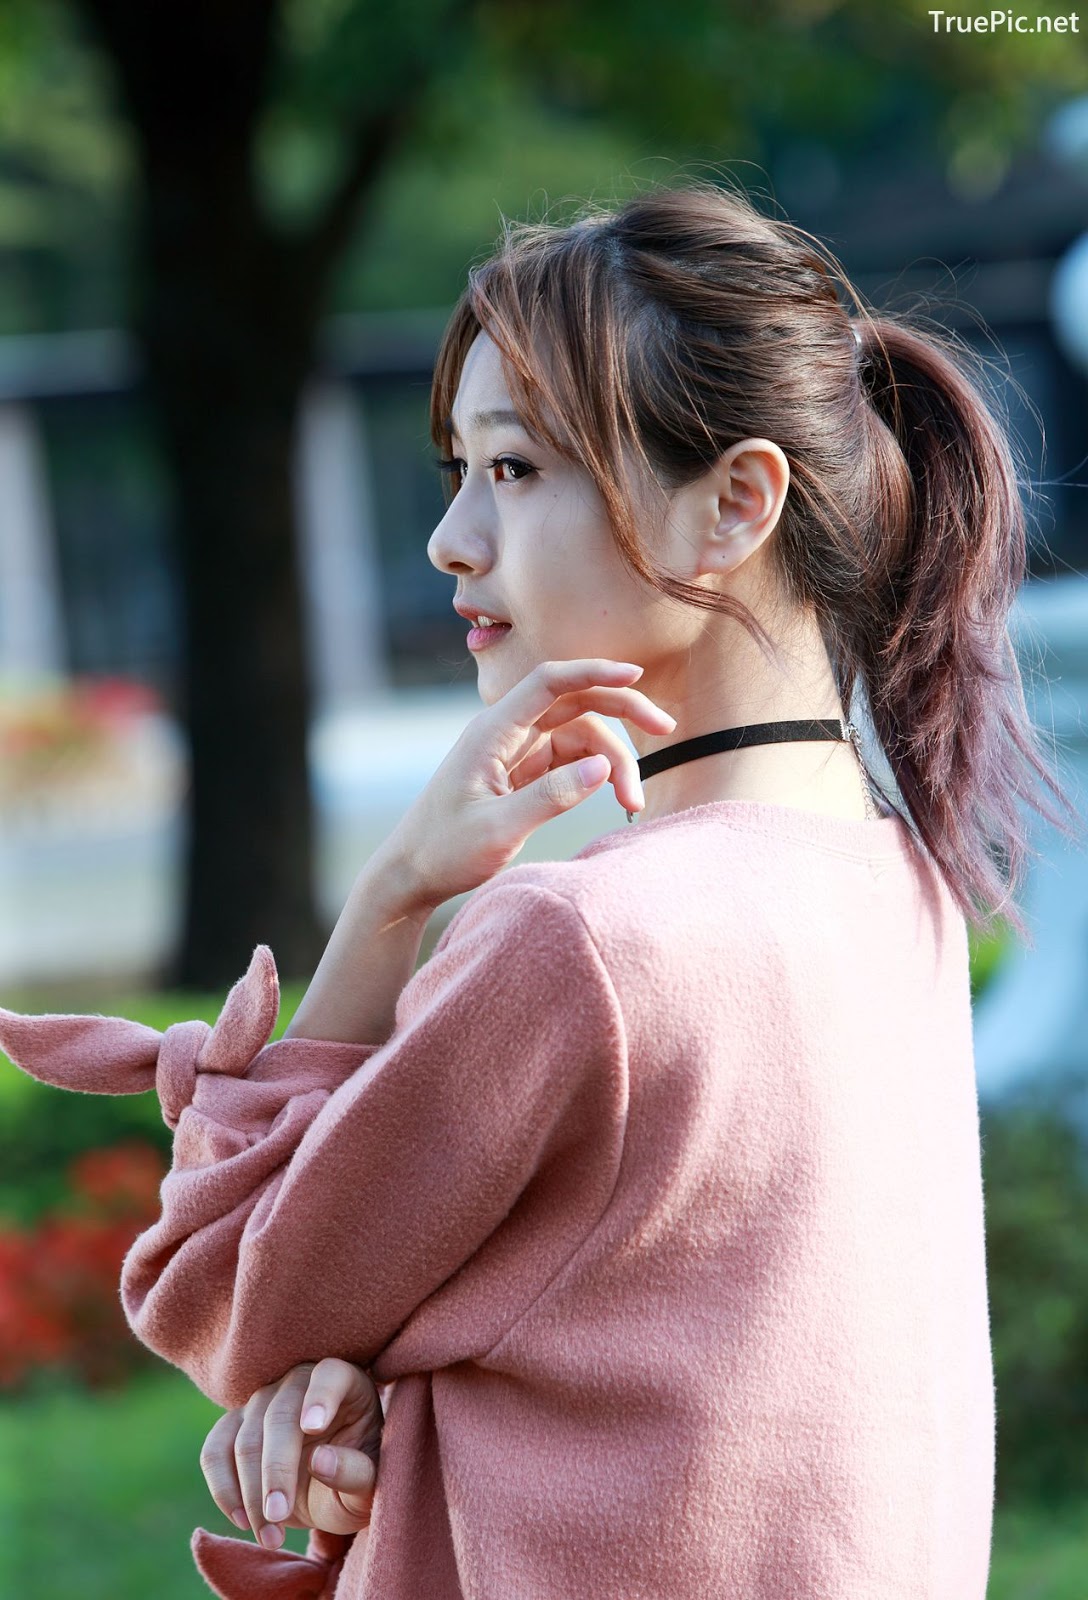 Image-Taiwanese-Model-郭思敏-Pure-And-Gorgeous-Girl-In-Pink-Sweater-Dress-TruePic.net- Picture-30